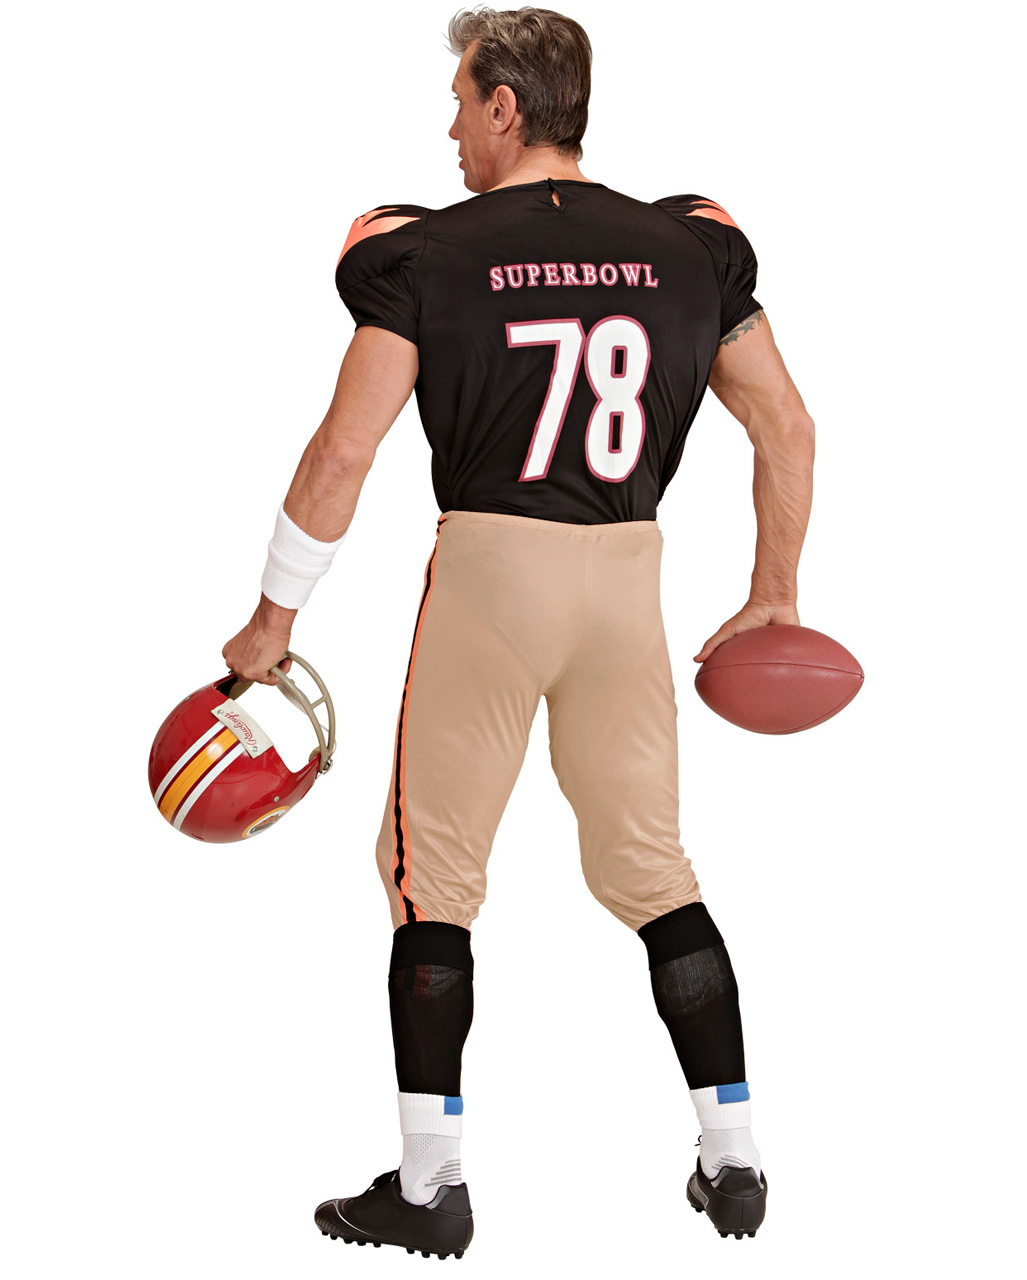 American Football Player Costume | Carnival & Motto Party | Horror-Shop.com